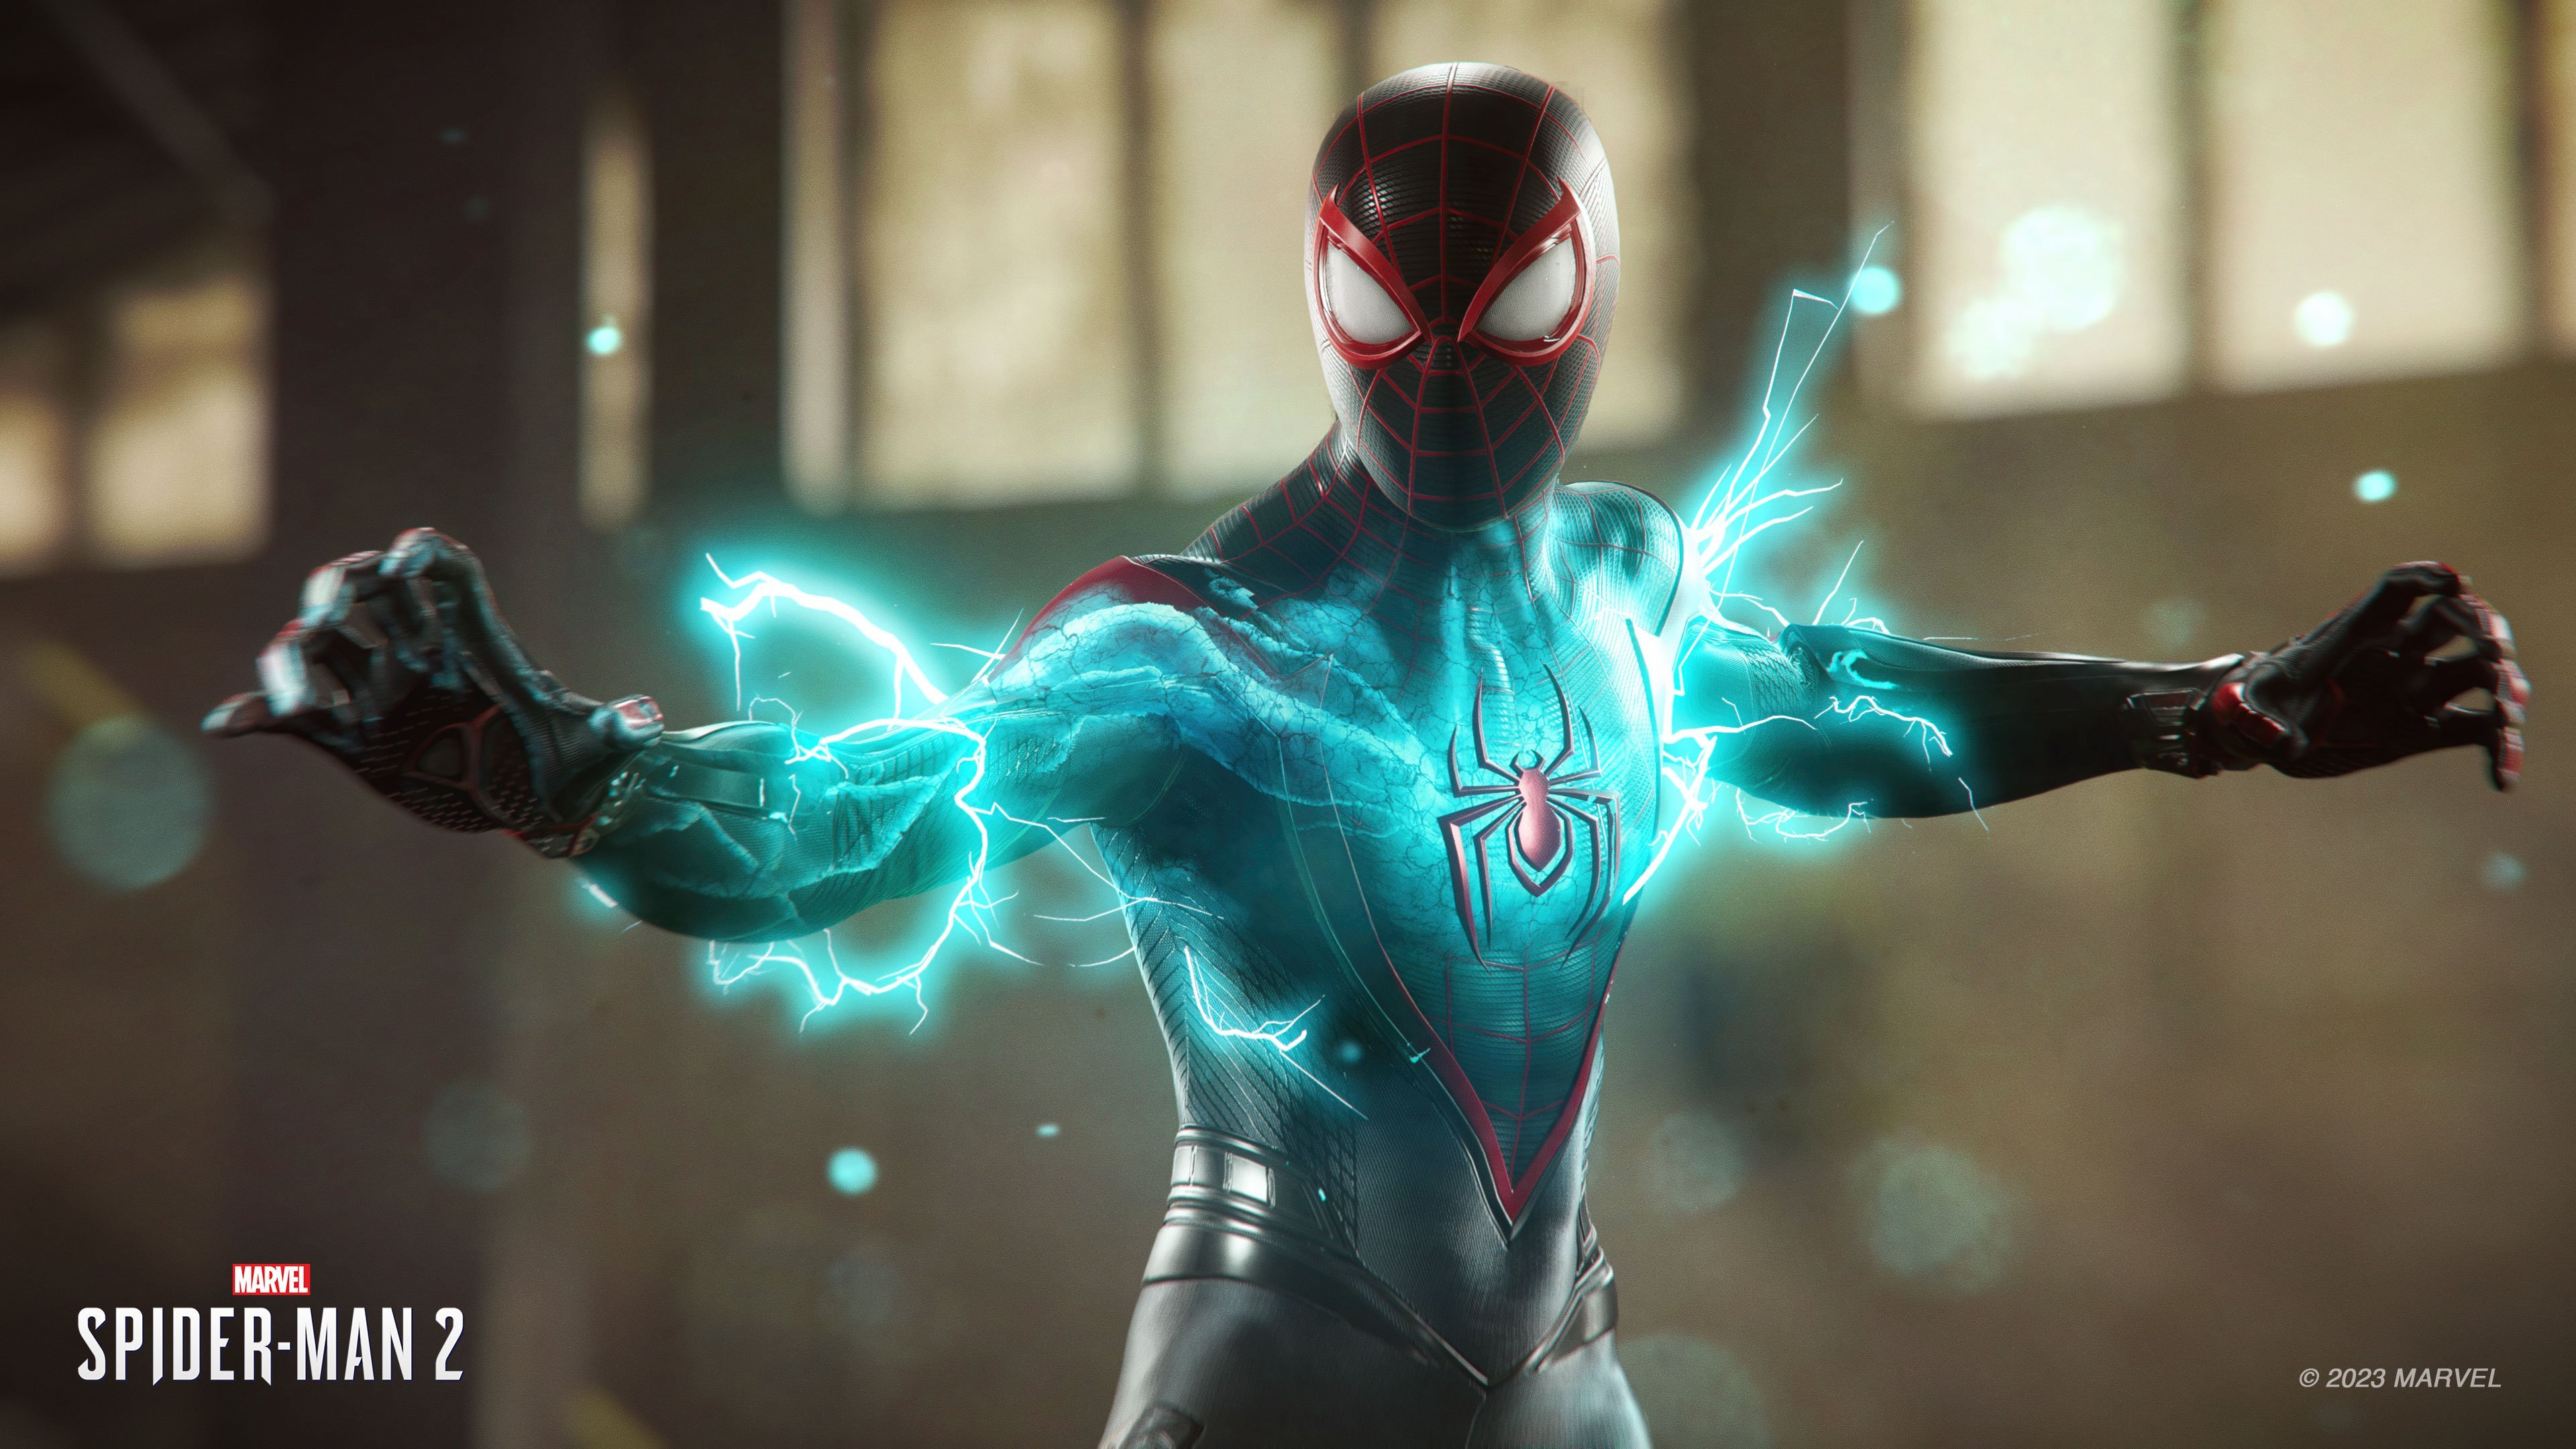 We are now EXACTLY ONE WEEK AWAY from the Marvel's Spider-Man 2